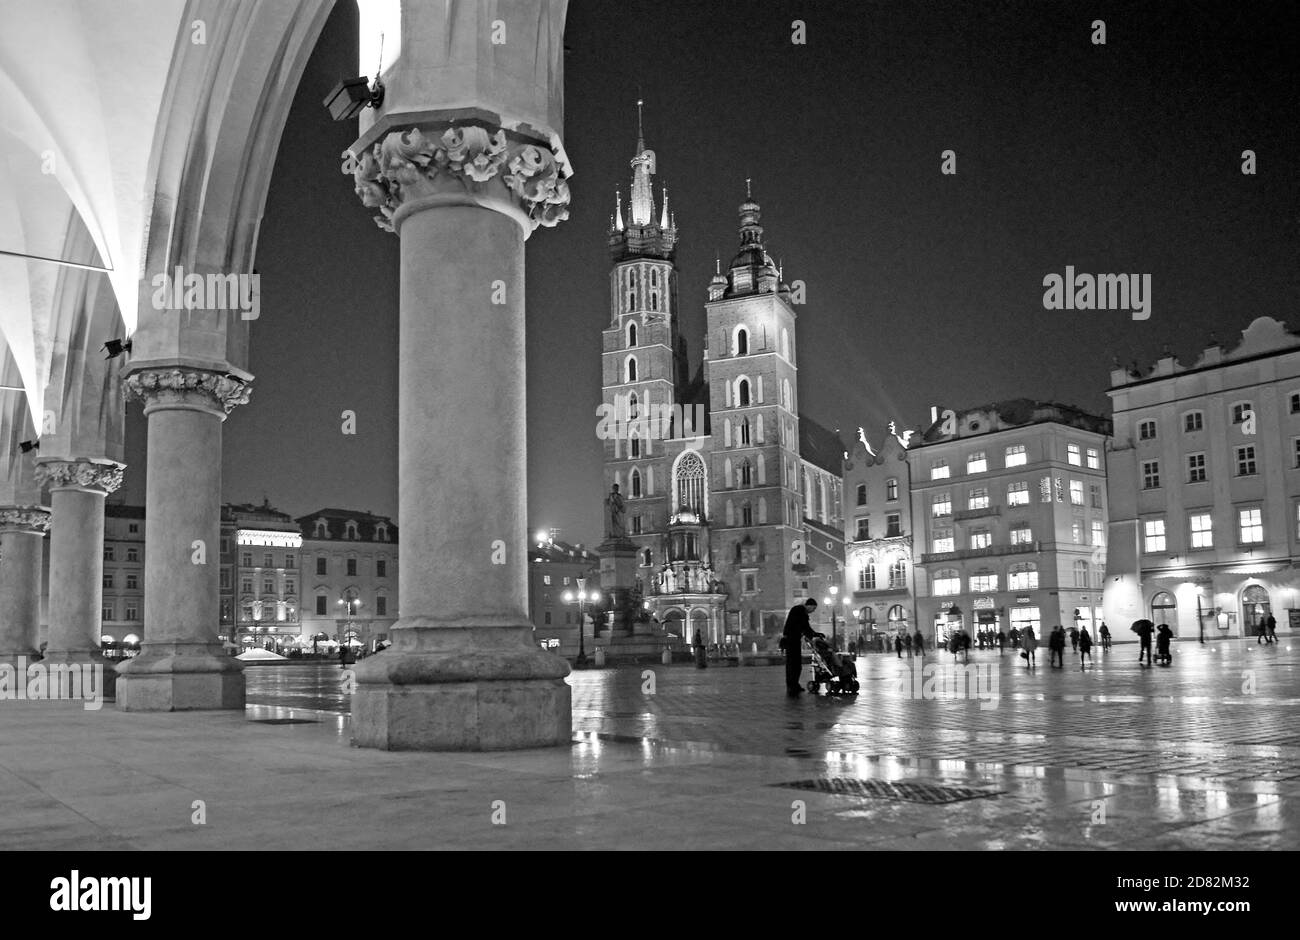 From the cloth hall, a rainy night in the 13th century main square in Krakow, Poland one view the gothic towers of St. Mary's Basilica are lit up. Stock Photo